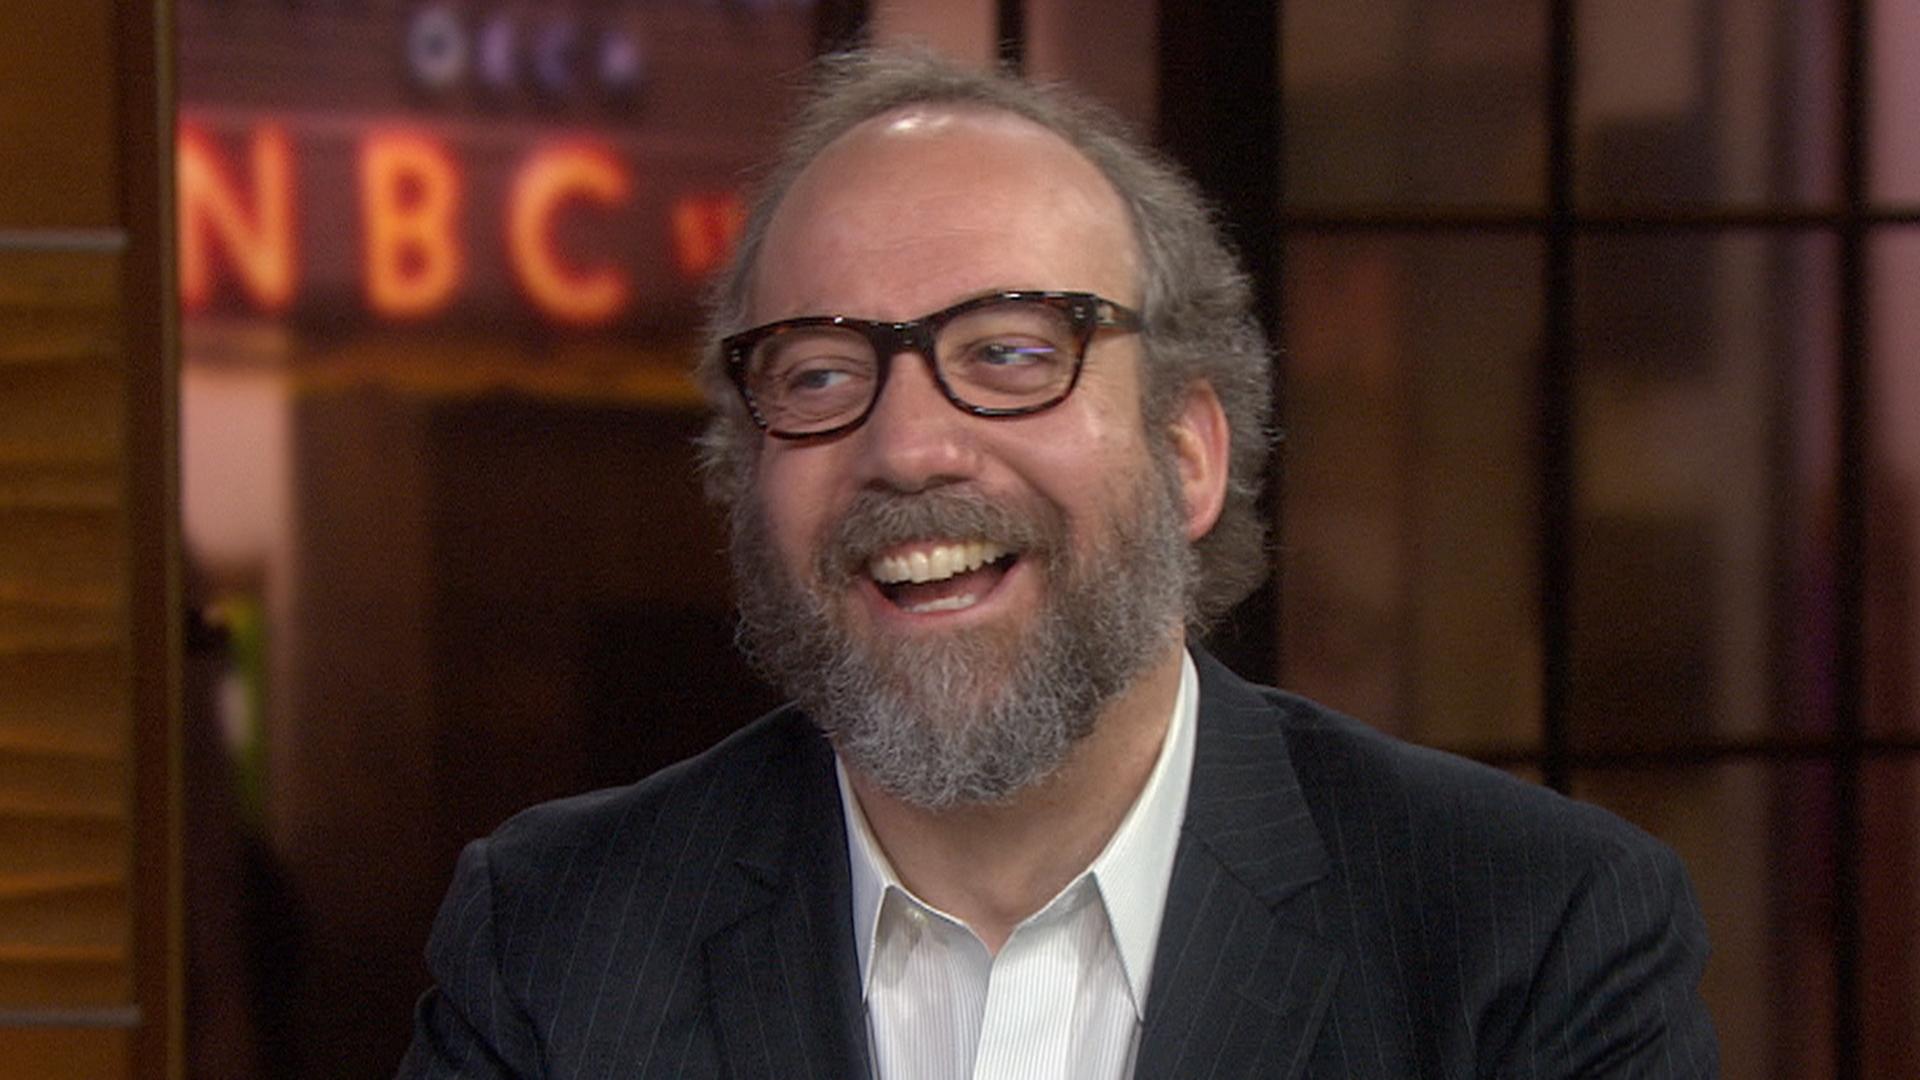 Paul Giamatti: I wanted to be a cartoonist